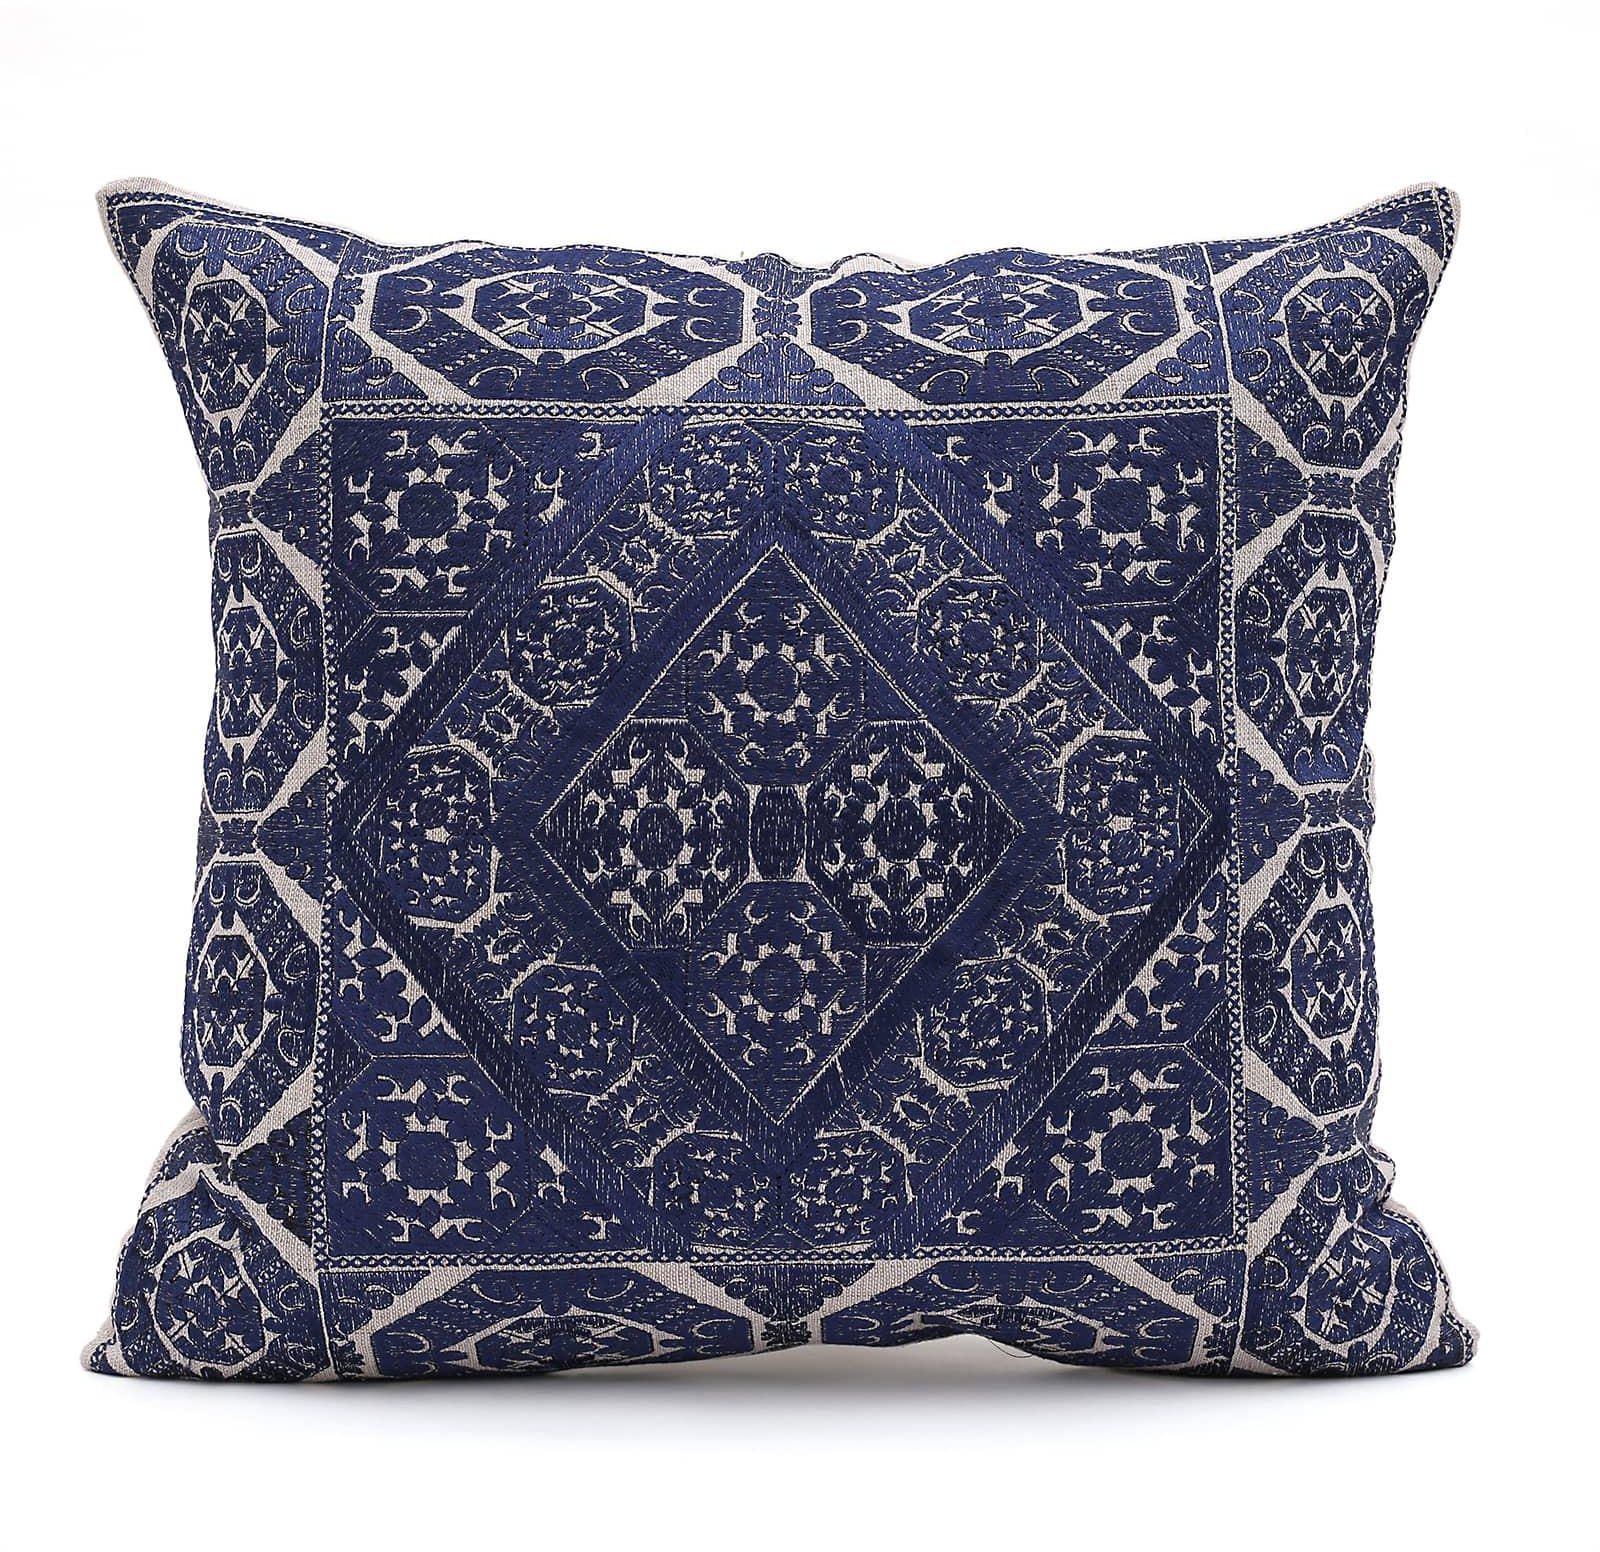 Home Evolution's Indigo Hand Embroidered Cushion Cover with Geometric Patterns